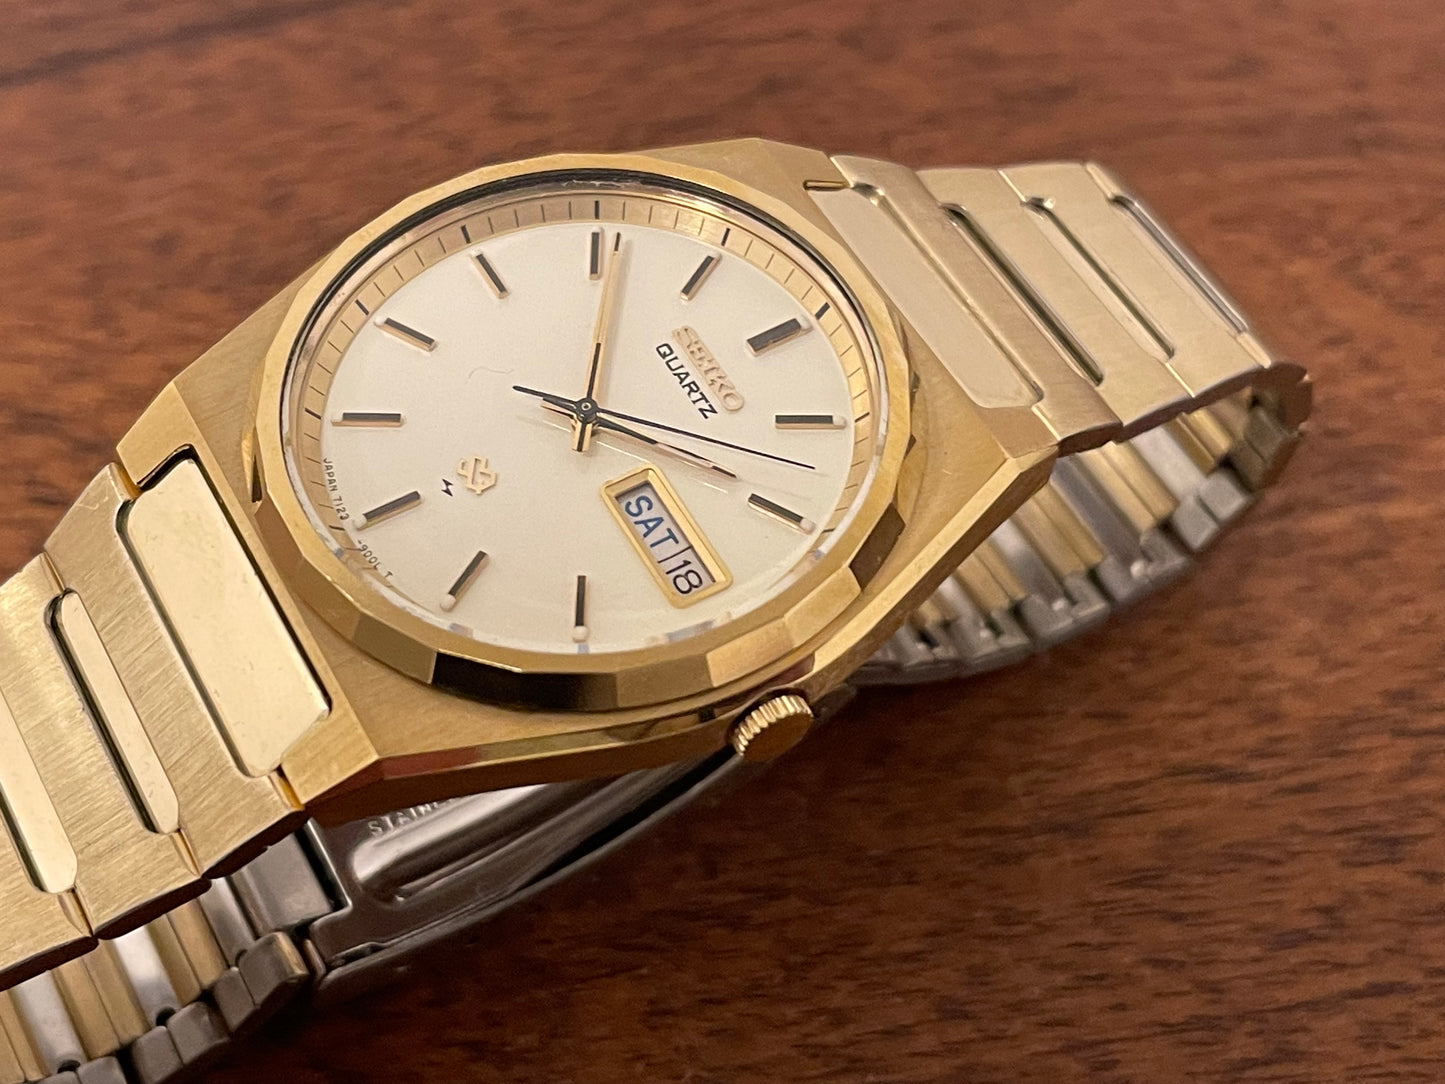 (1988) Seiko 7123-9000 SQ gold colored case with integrated bracelet (serviced)